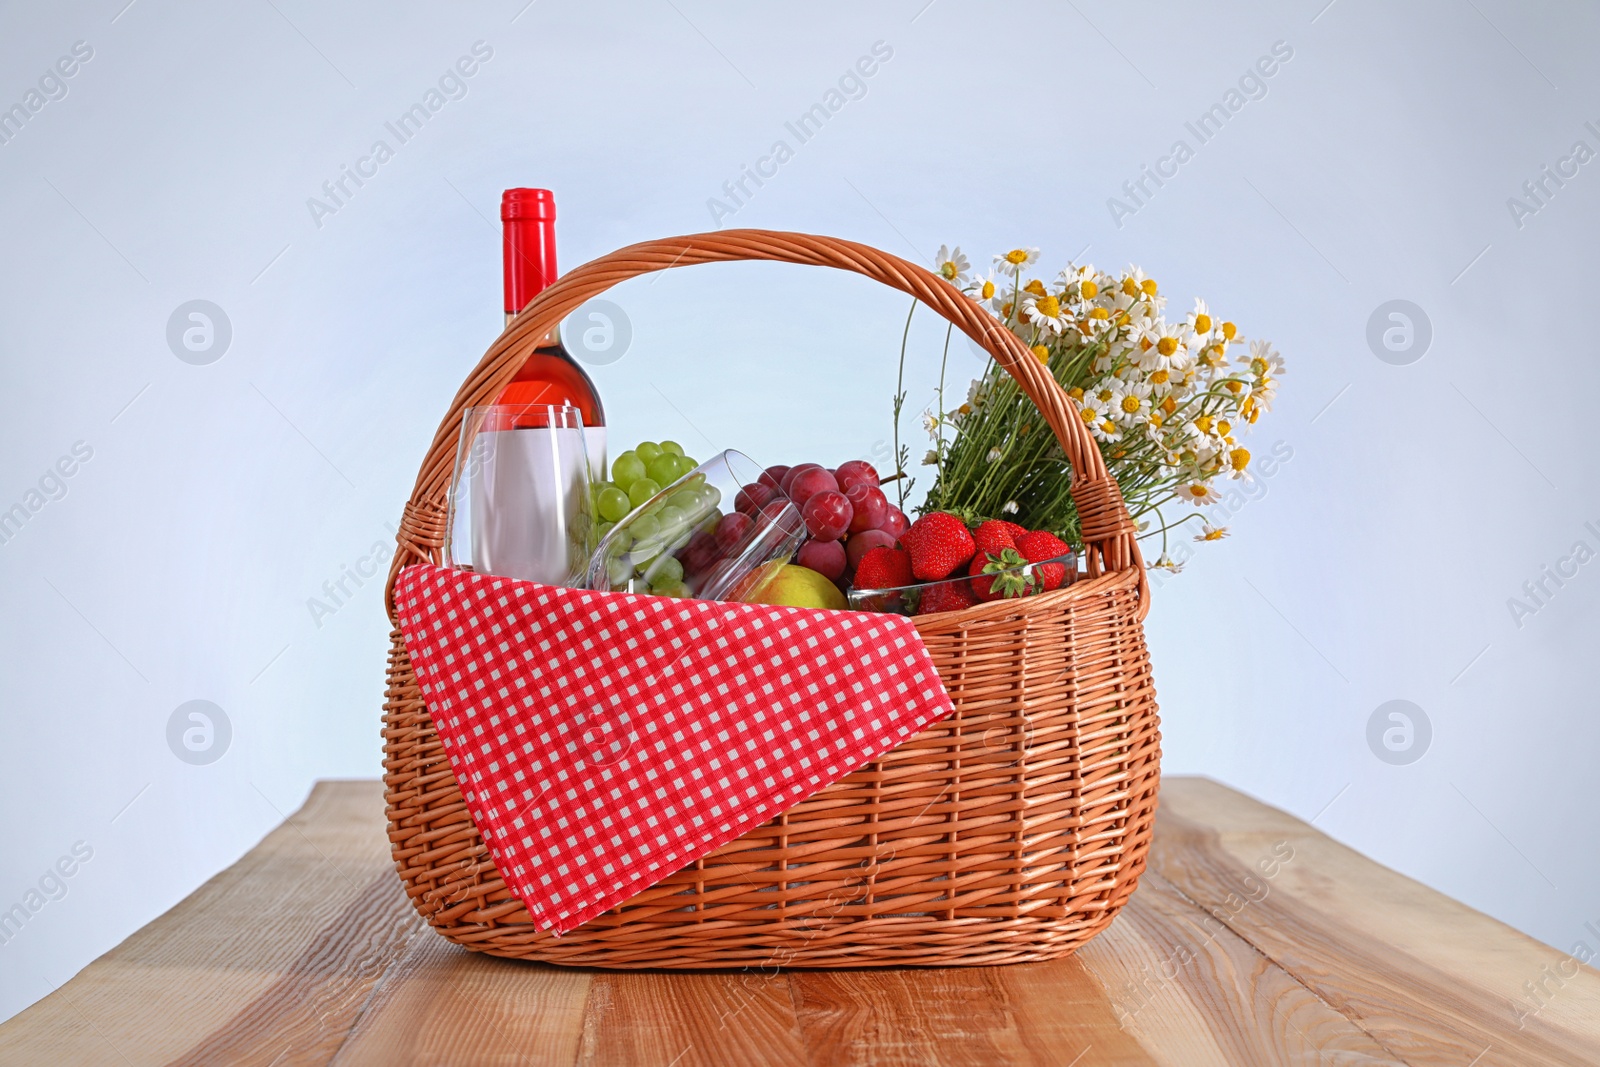 Photo of Picnic basket with wine and products on wooden table against white background